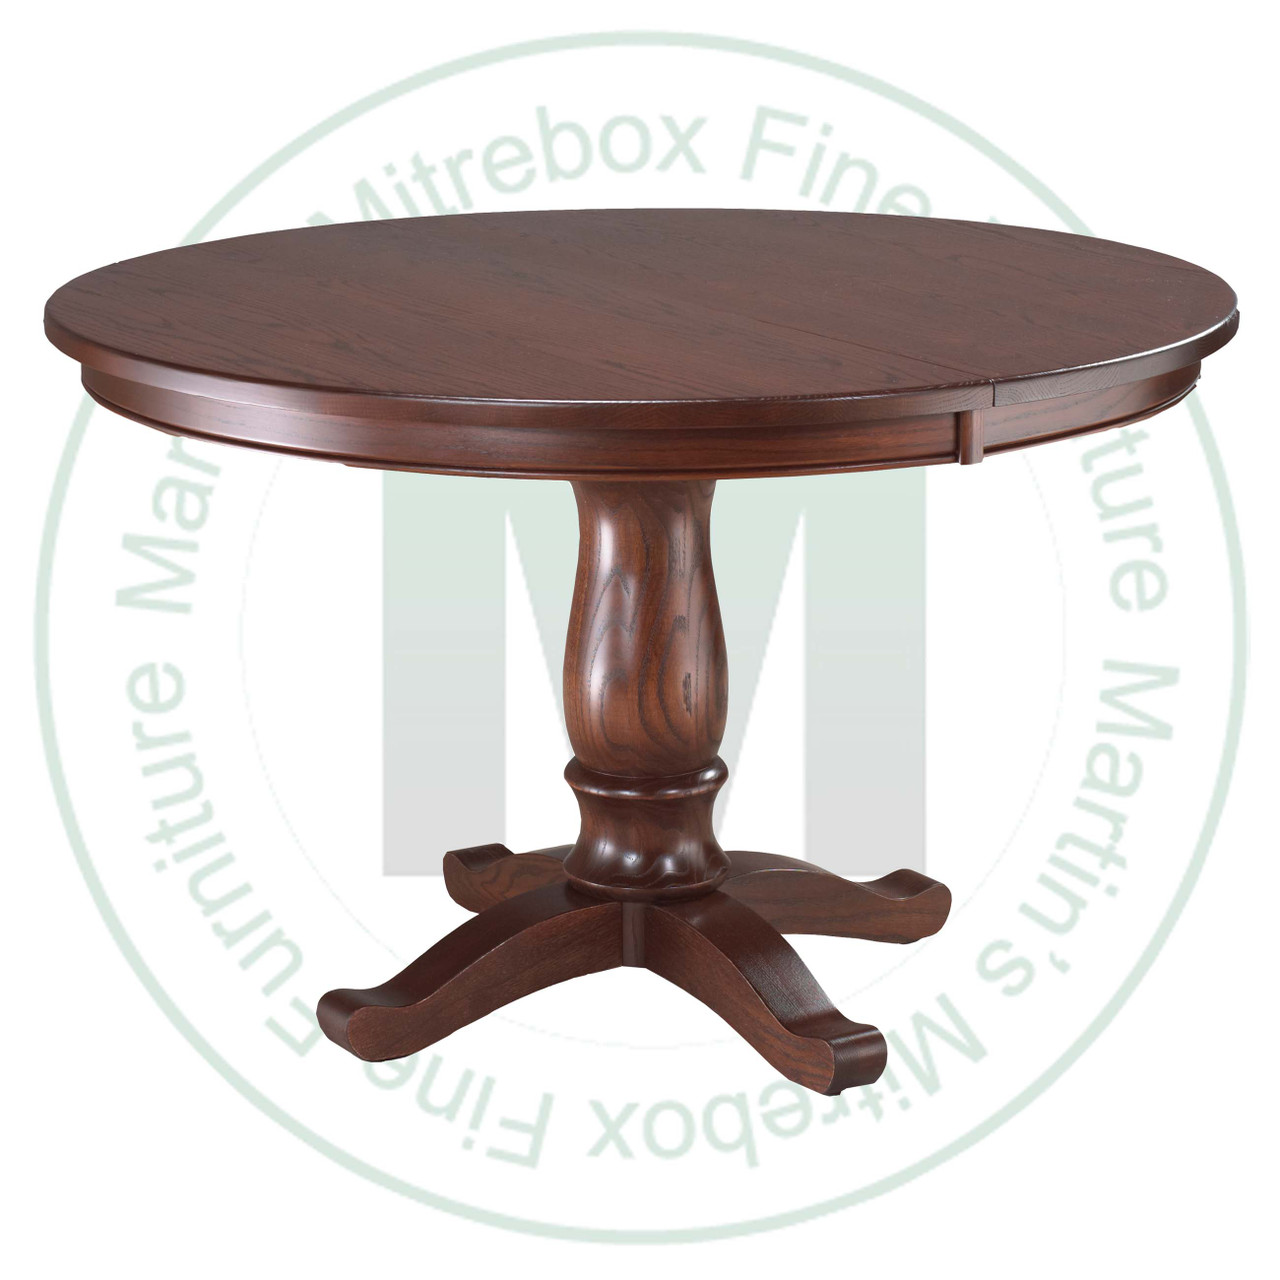 Maple Kimberly Crest Single Pedestal Table 42''D x 48''W x 30''H Round Solid Table. Table Has 1'' Thick Top.